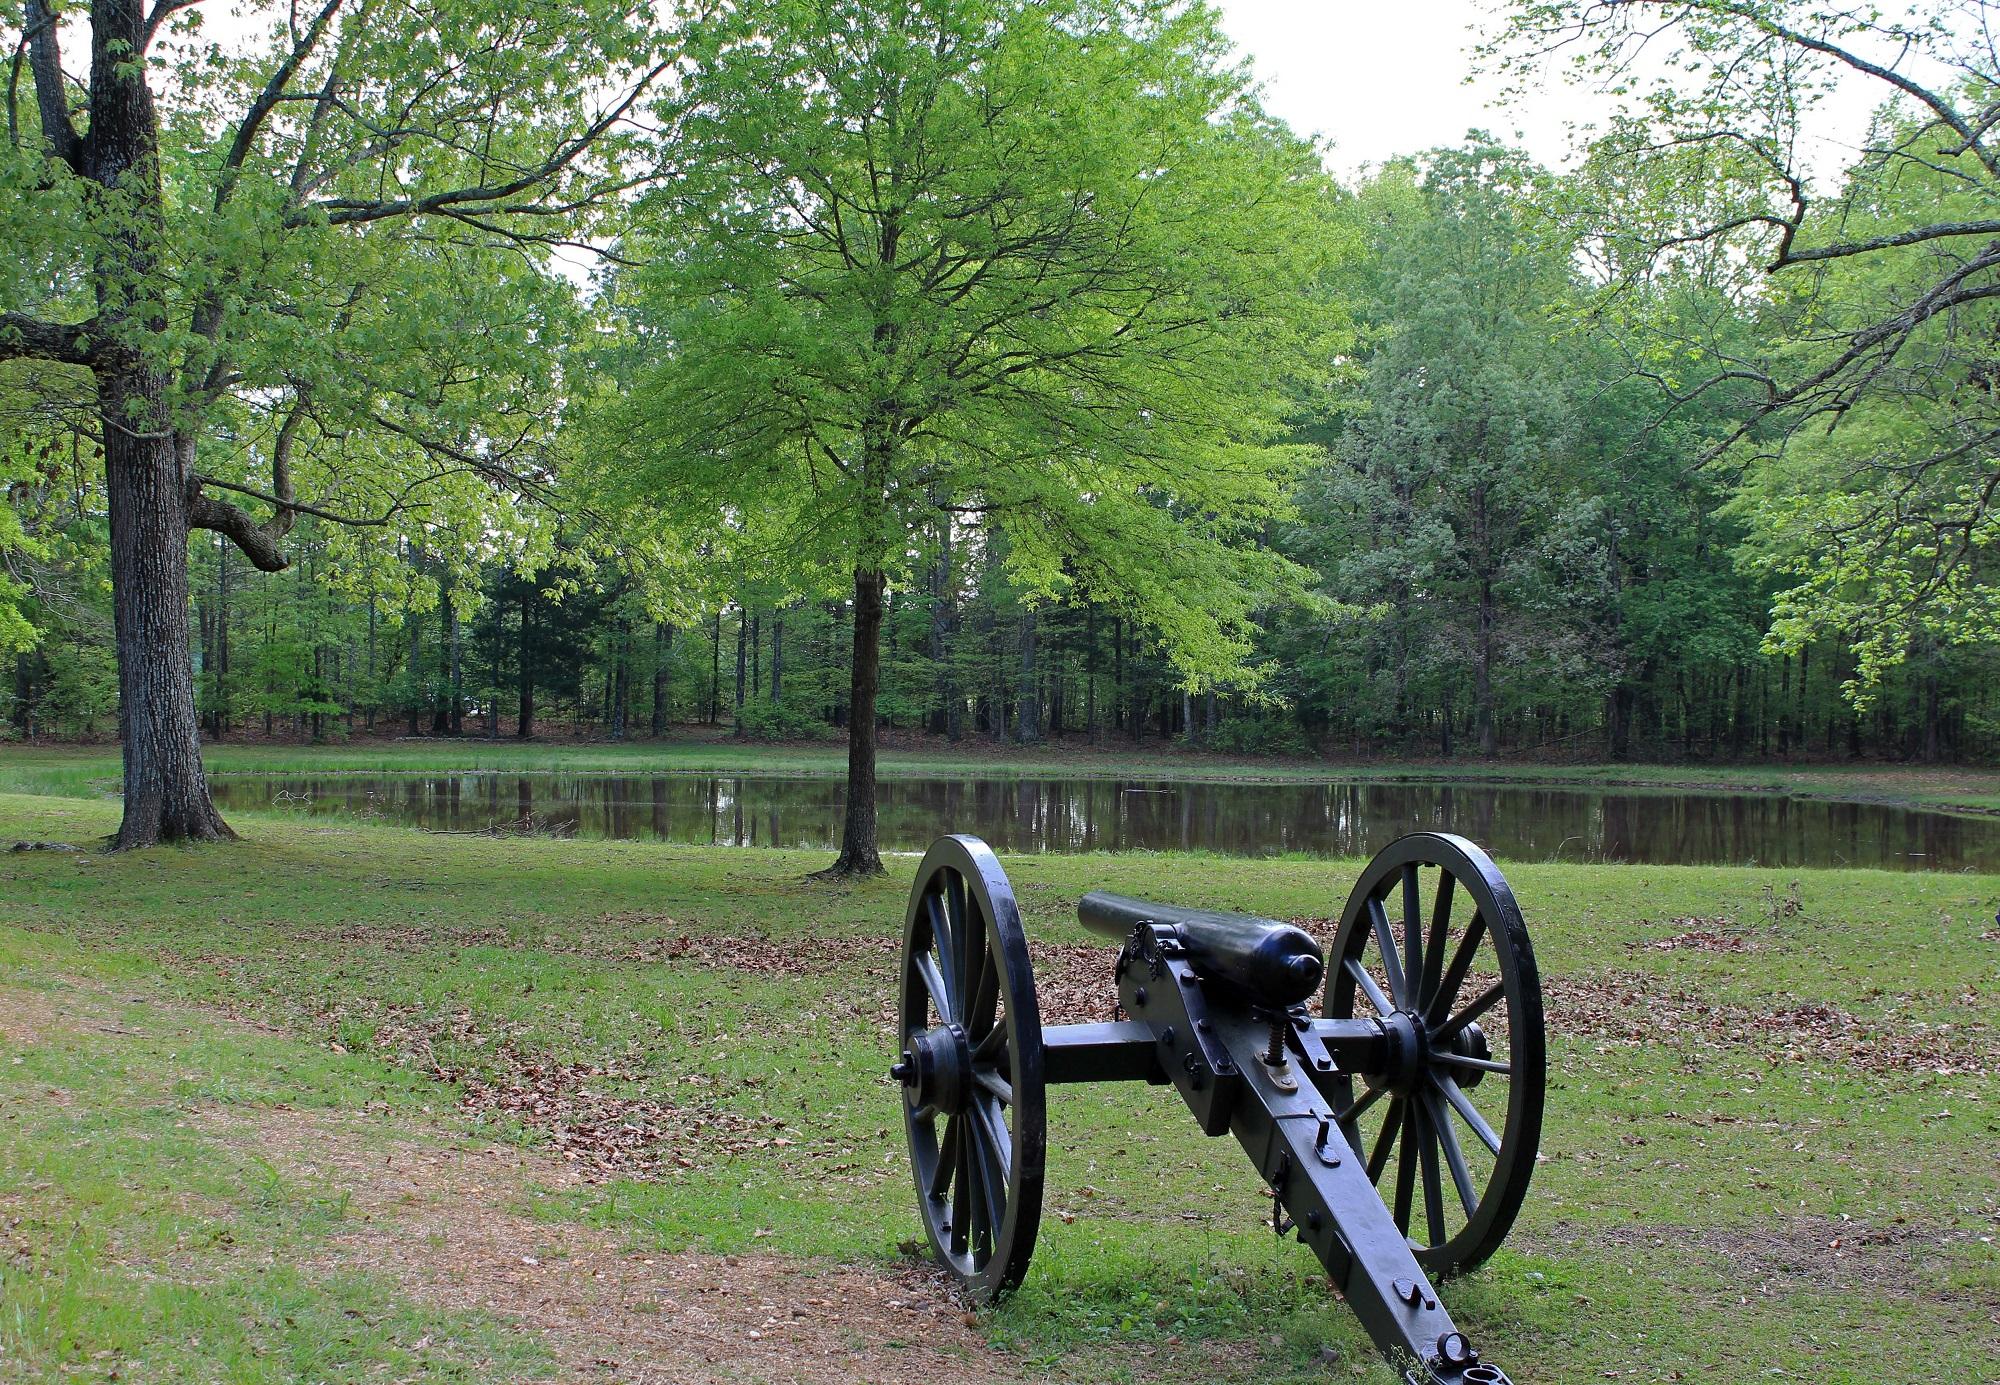 Cannon overlooking the Bloody Pond